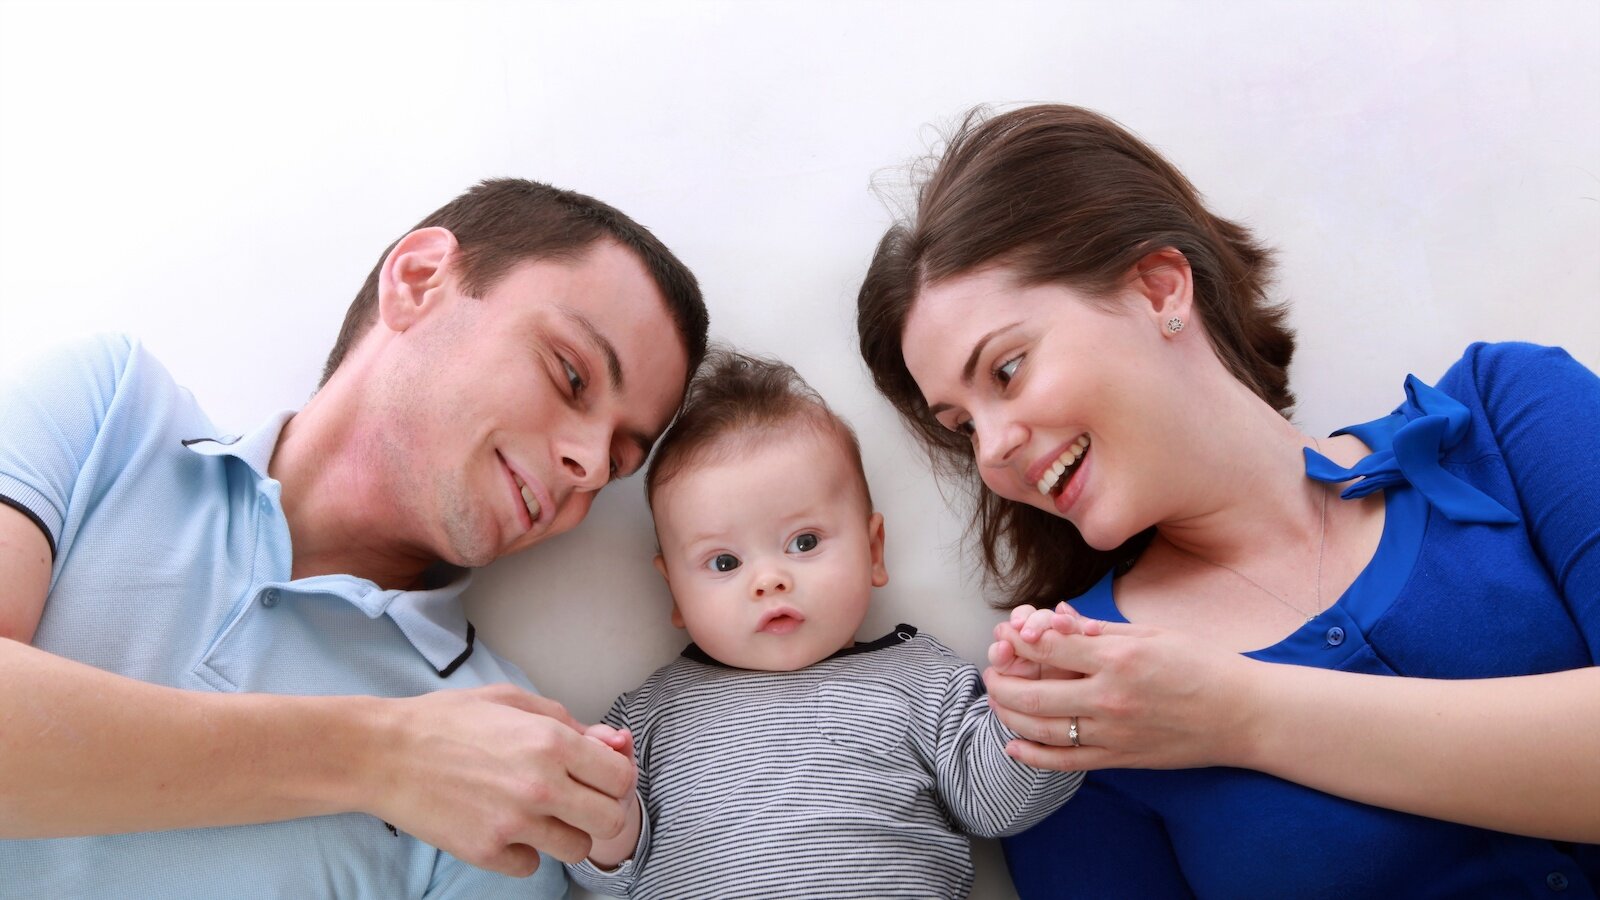 Parents Say: How can I manage the competing demands of a newborn